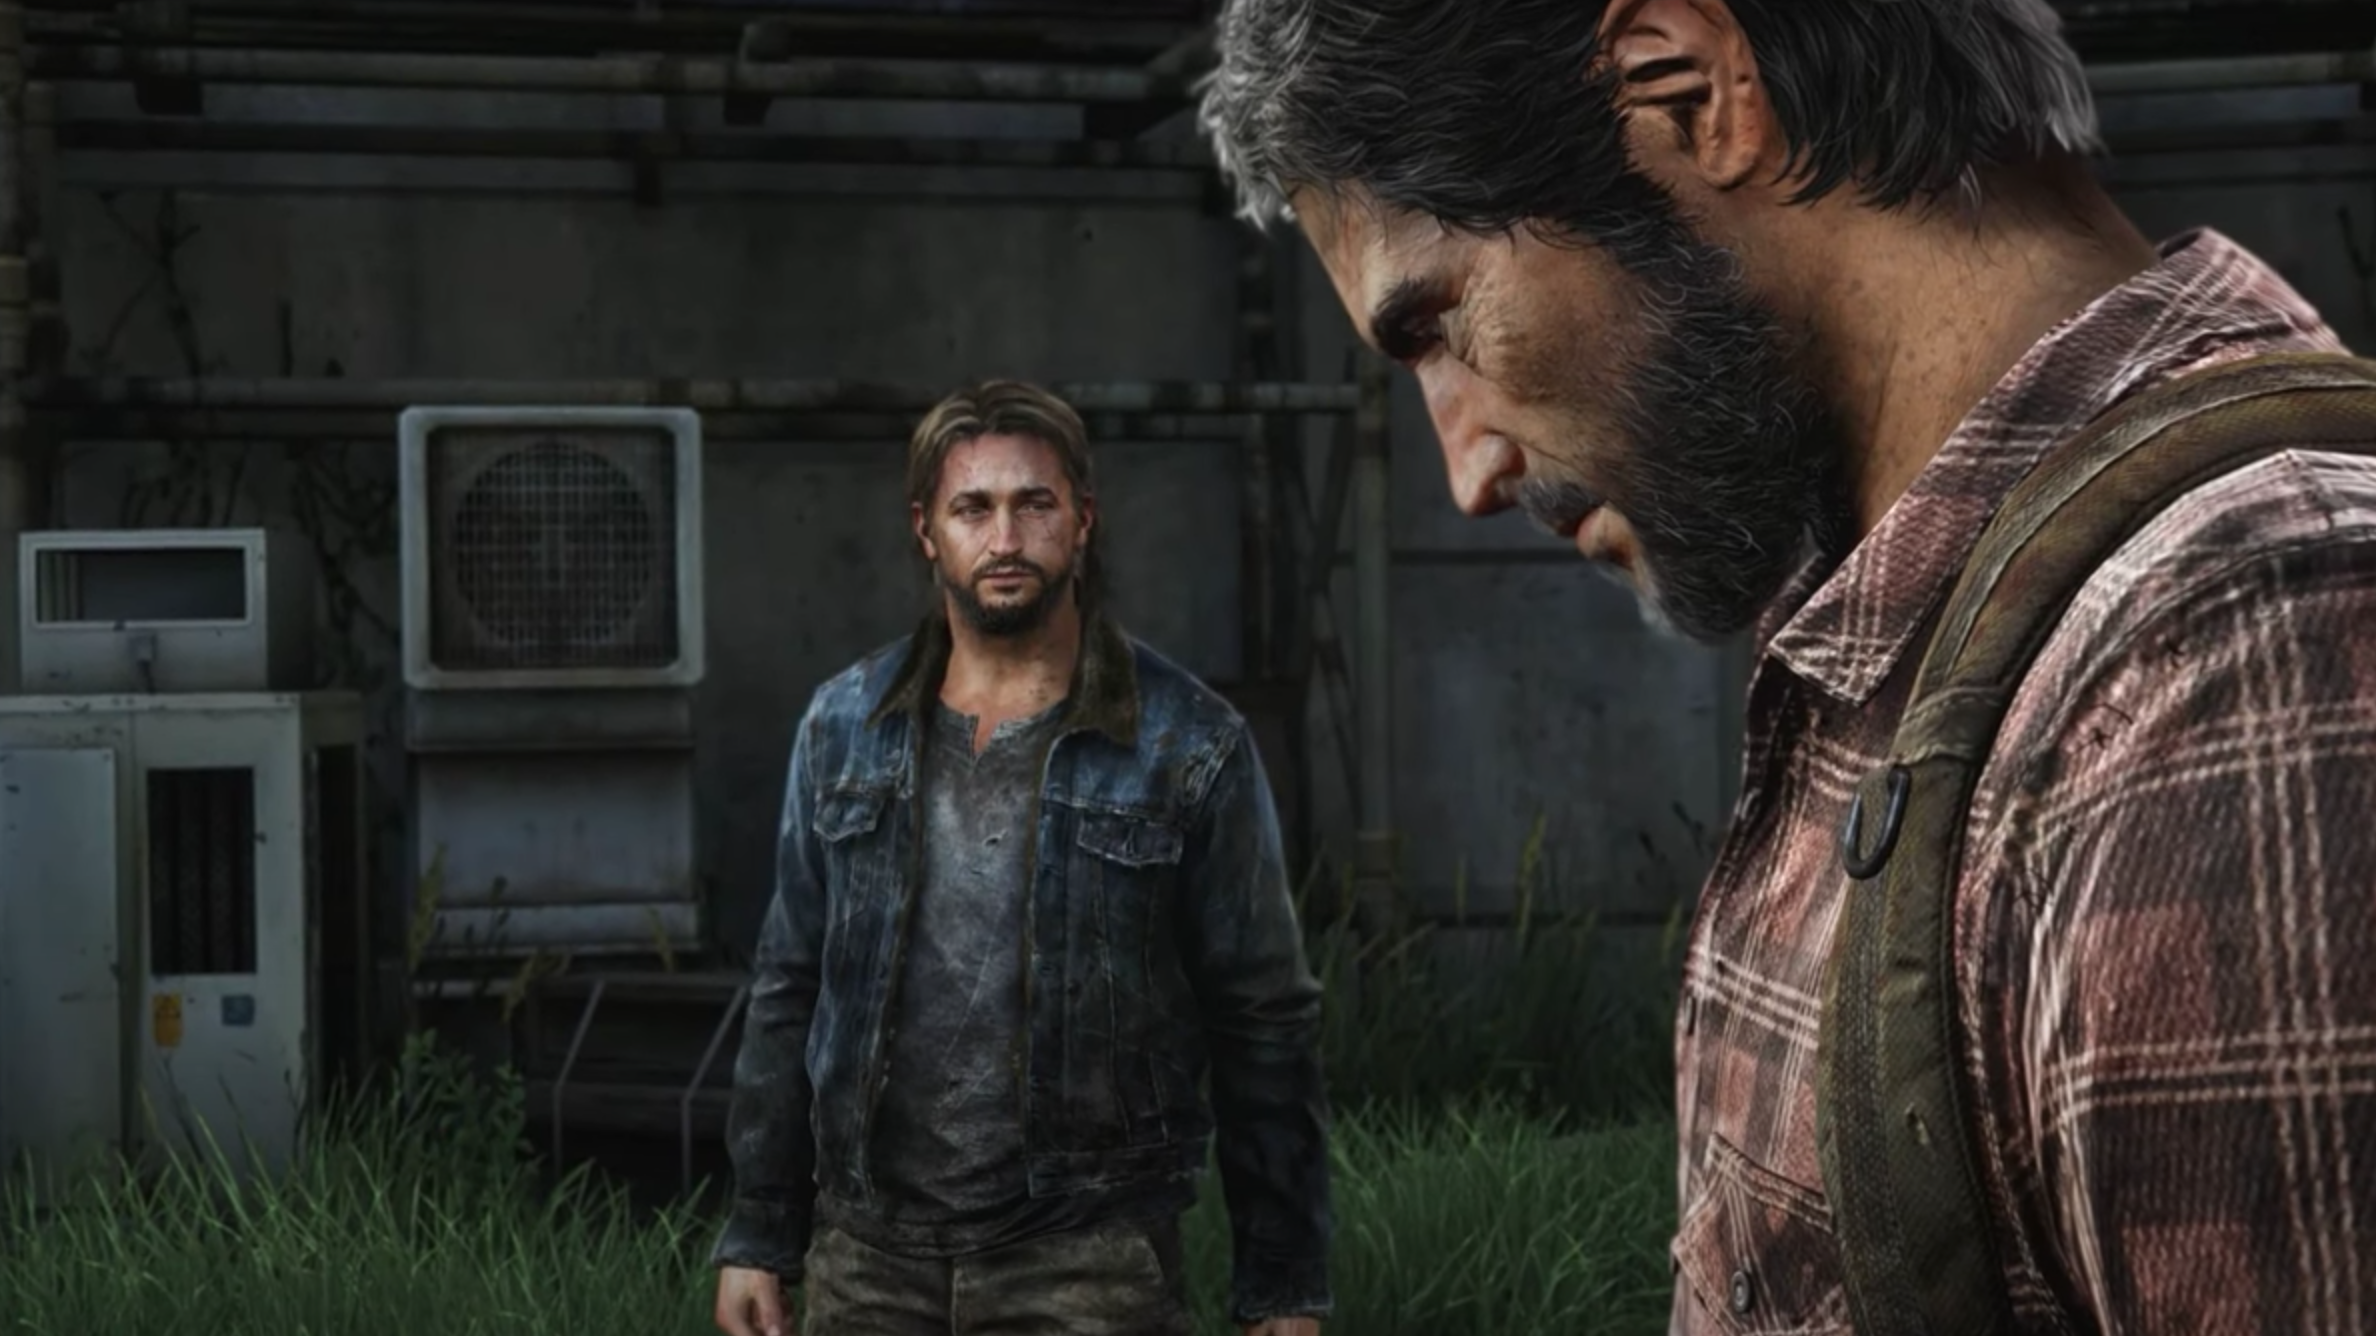 What Happened To Tommy In The Last Of Us?